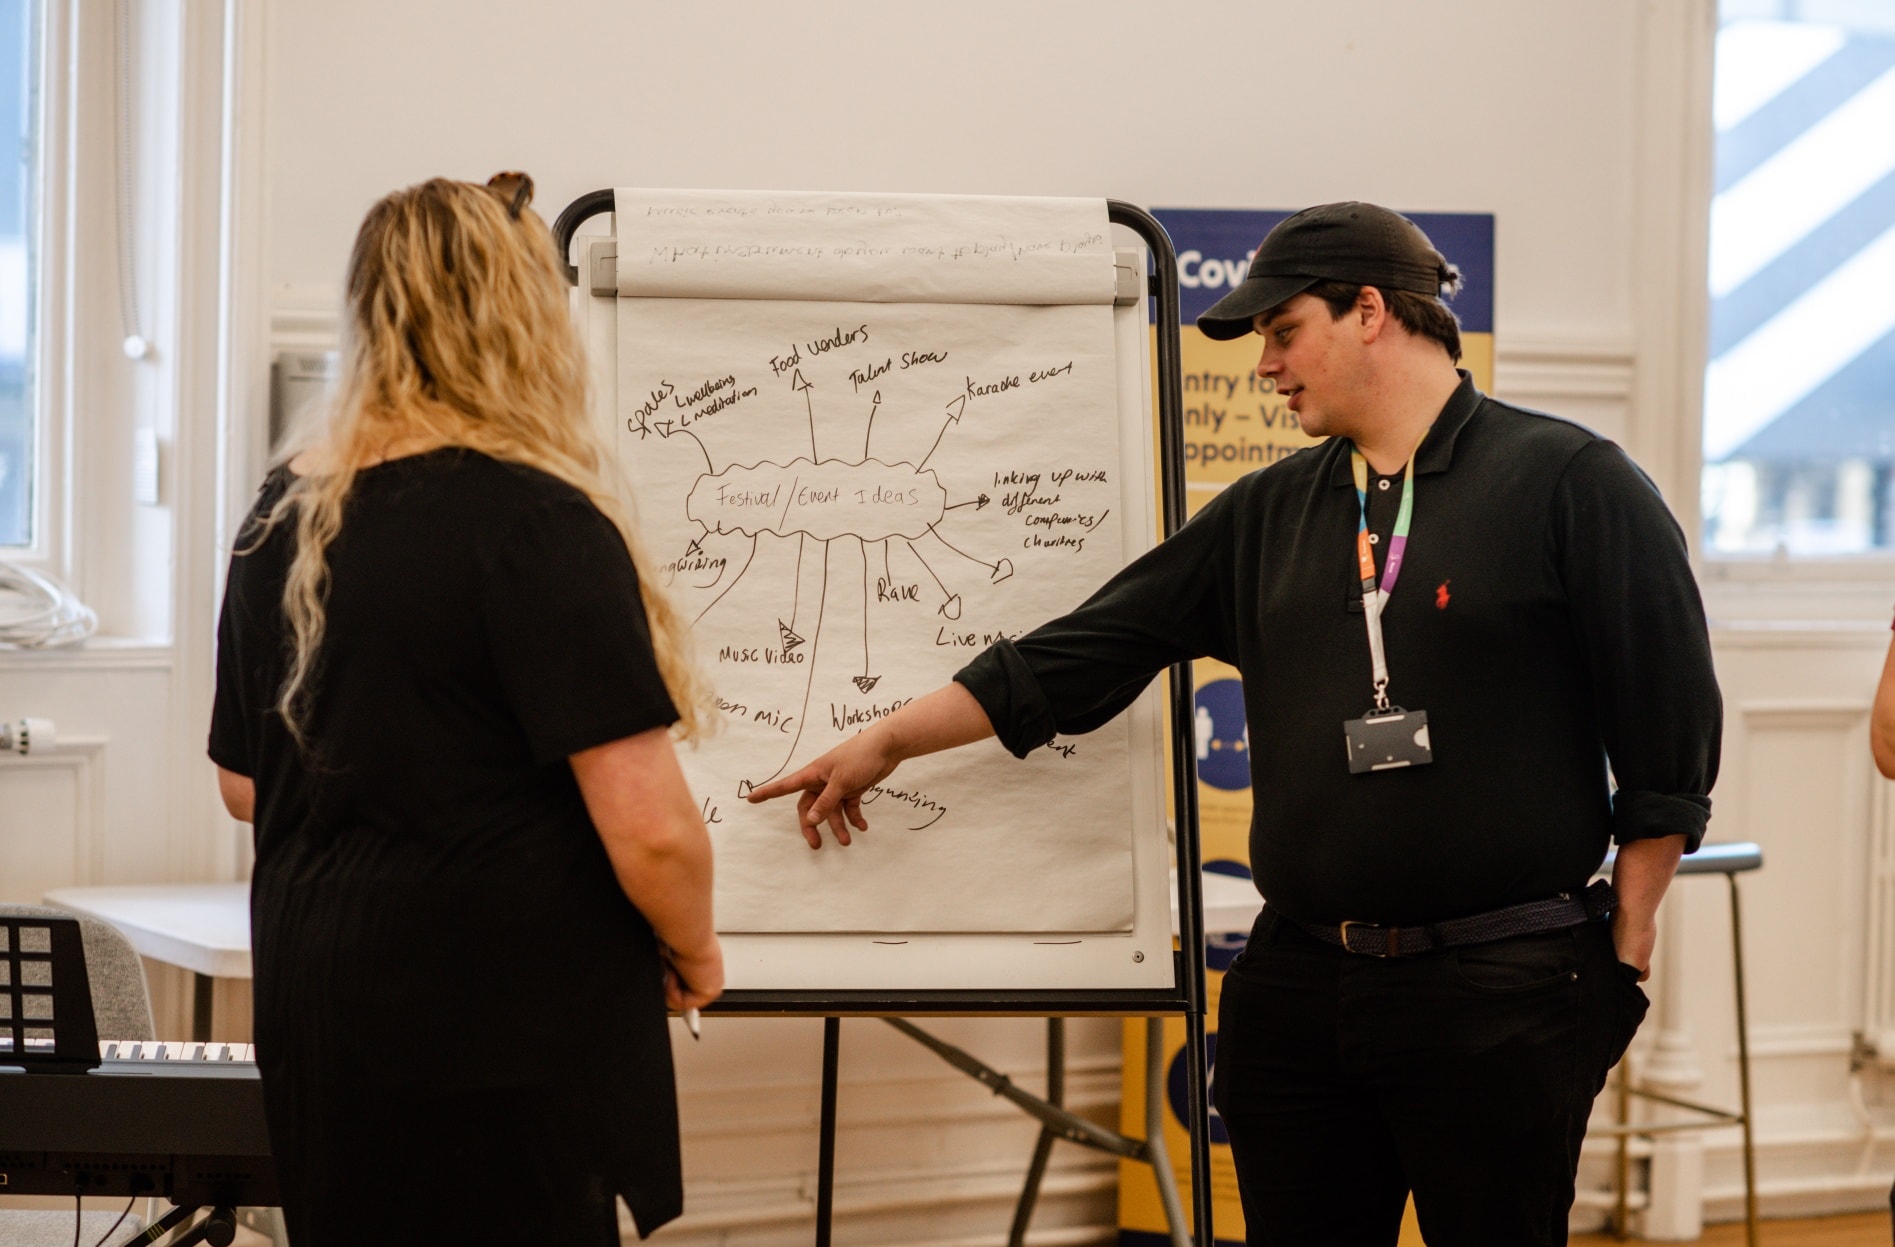 A woman looking at a man pointing at a flipchart with illustrations